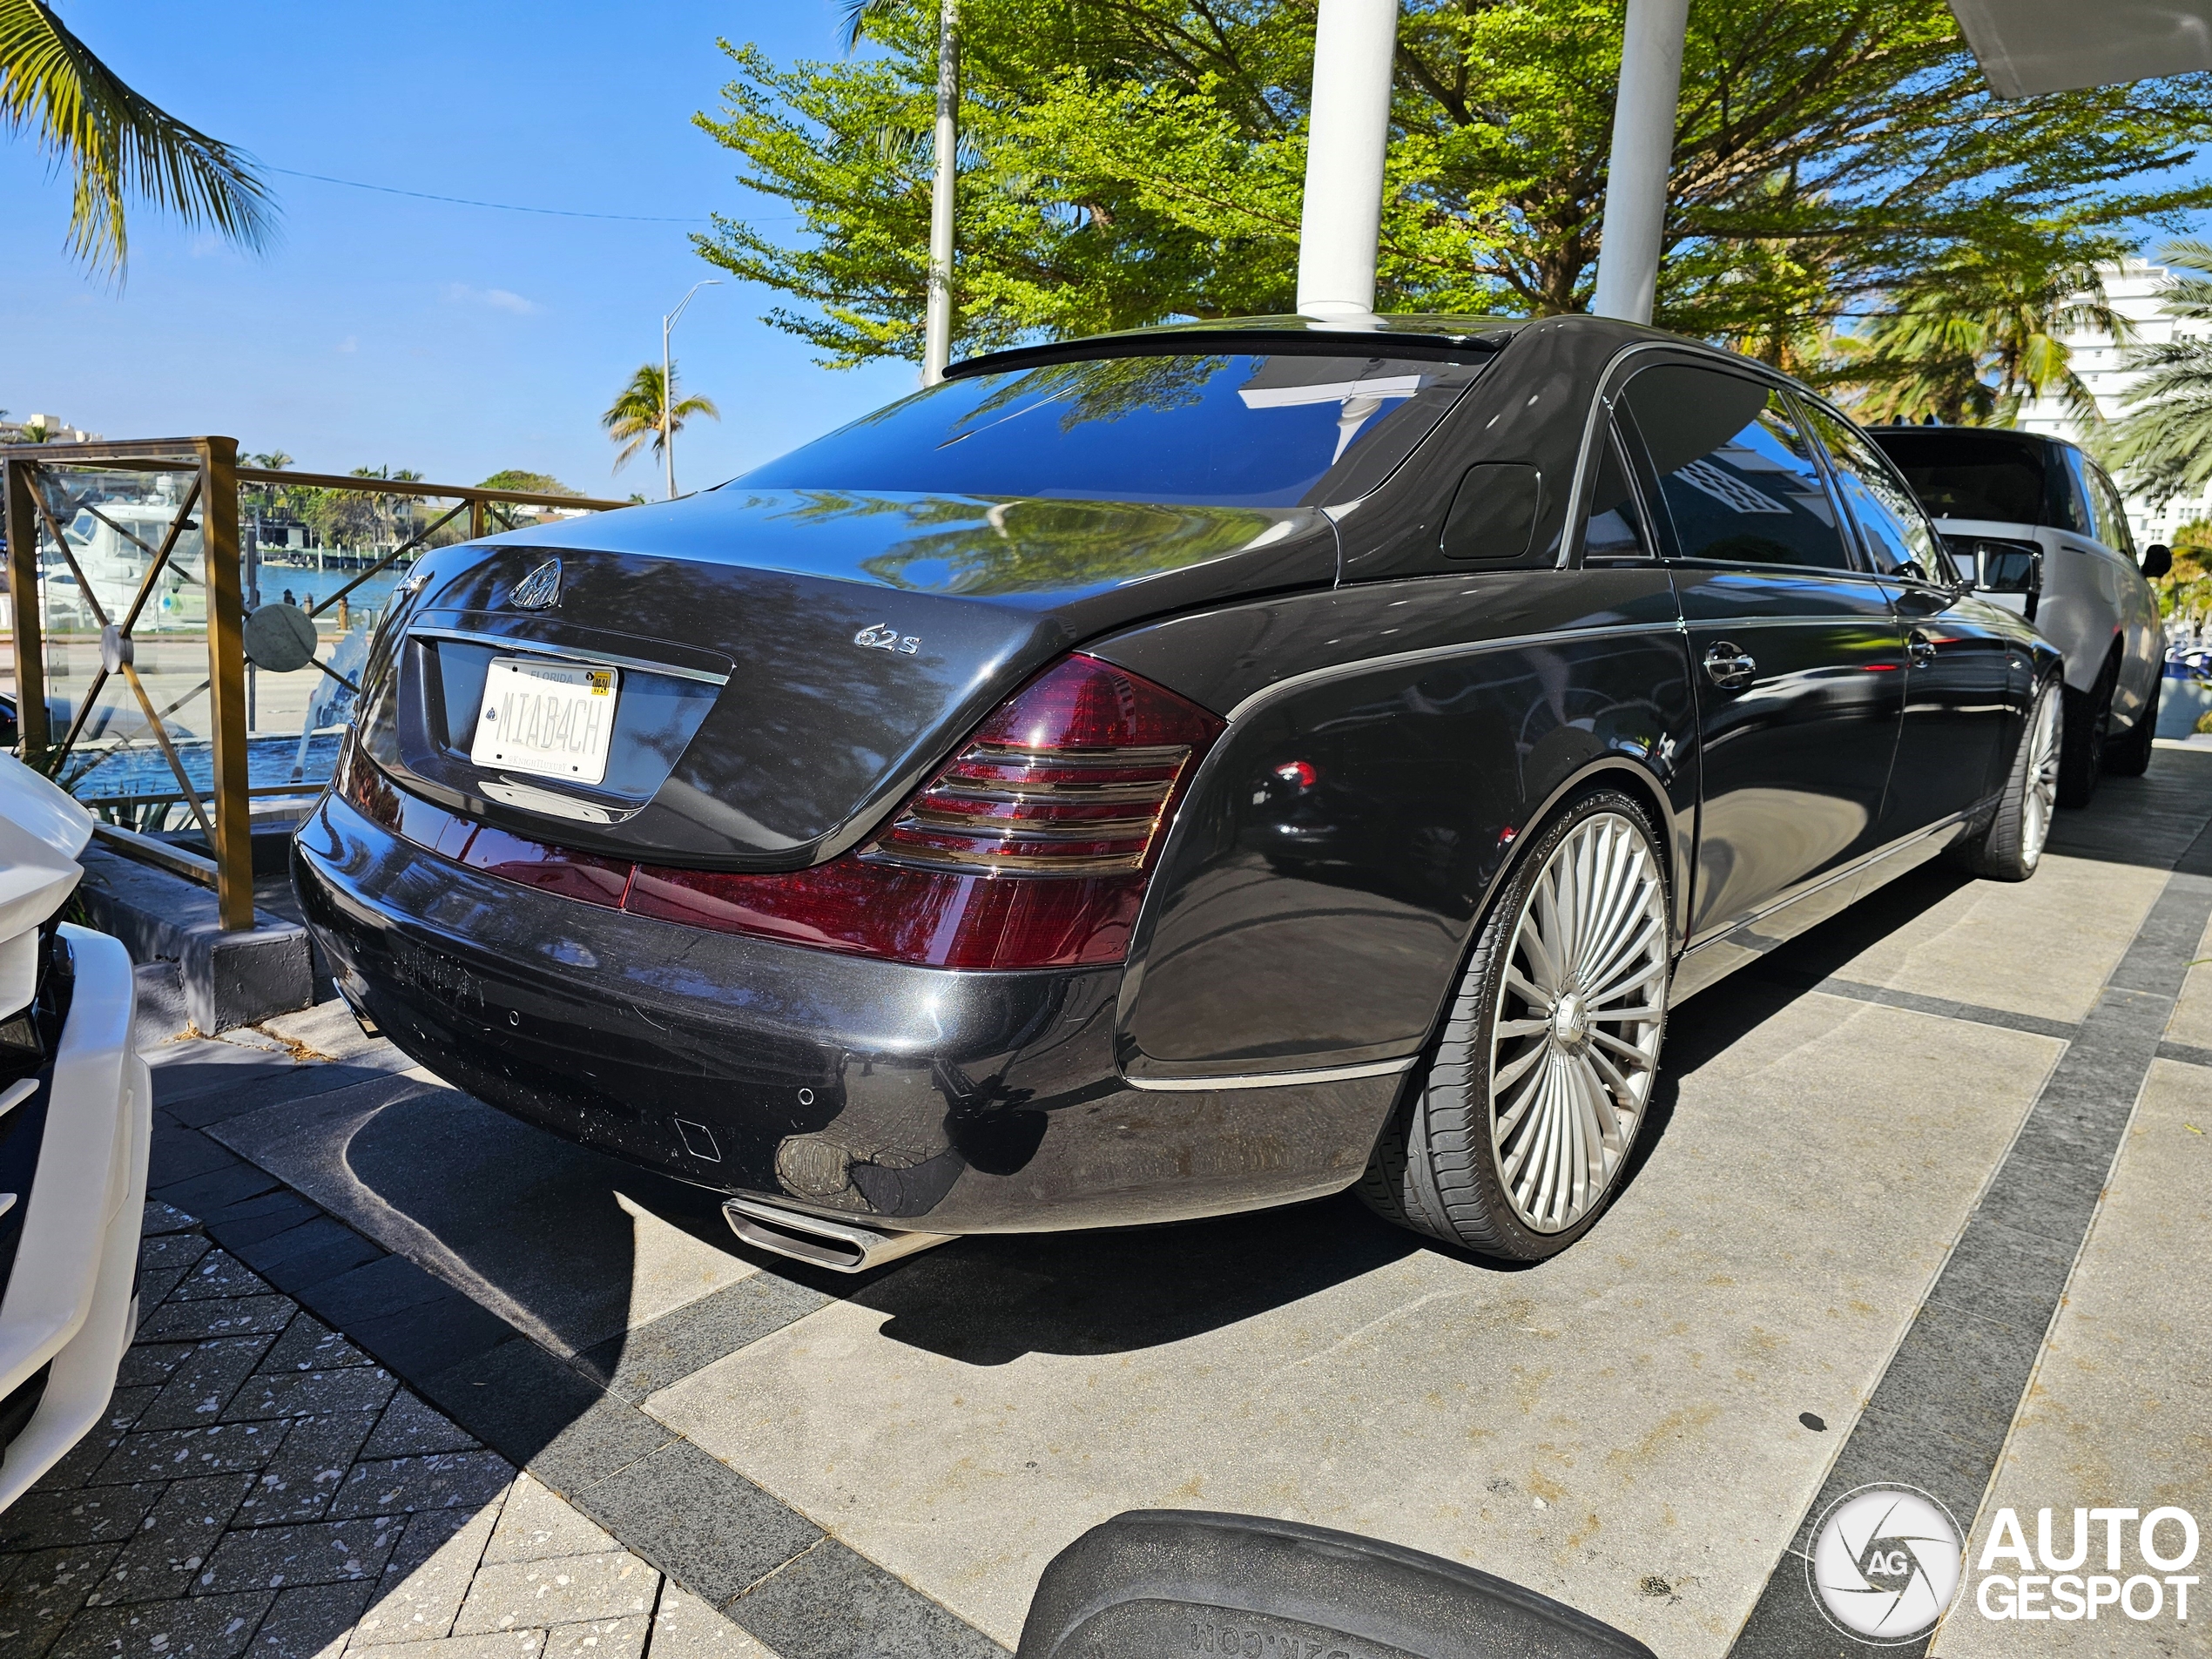 Is this the perfect limousine for Miami Beach?